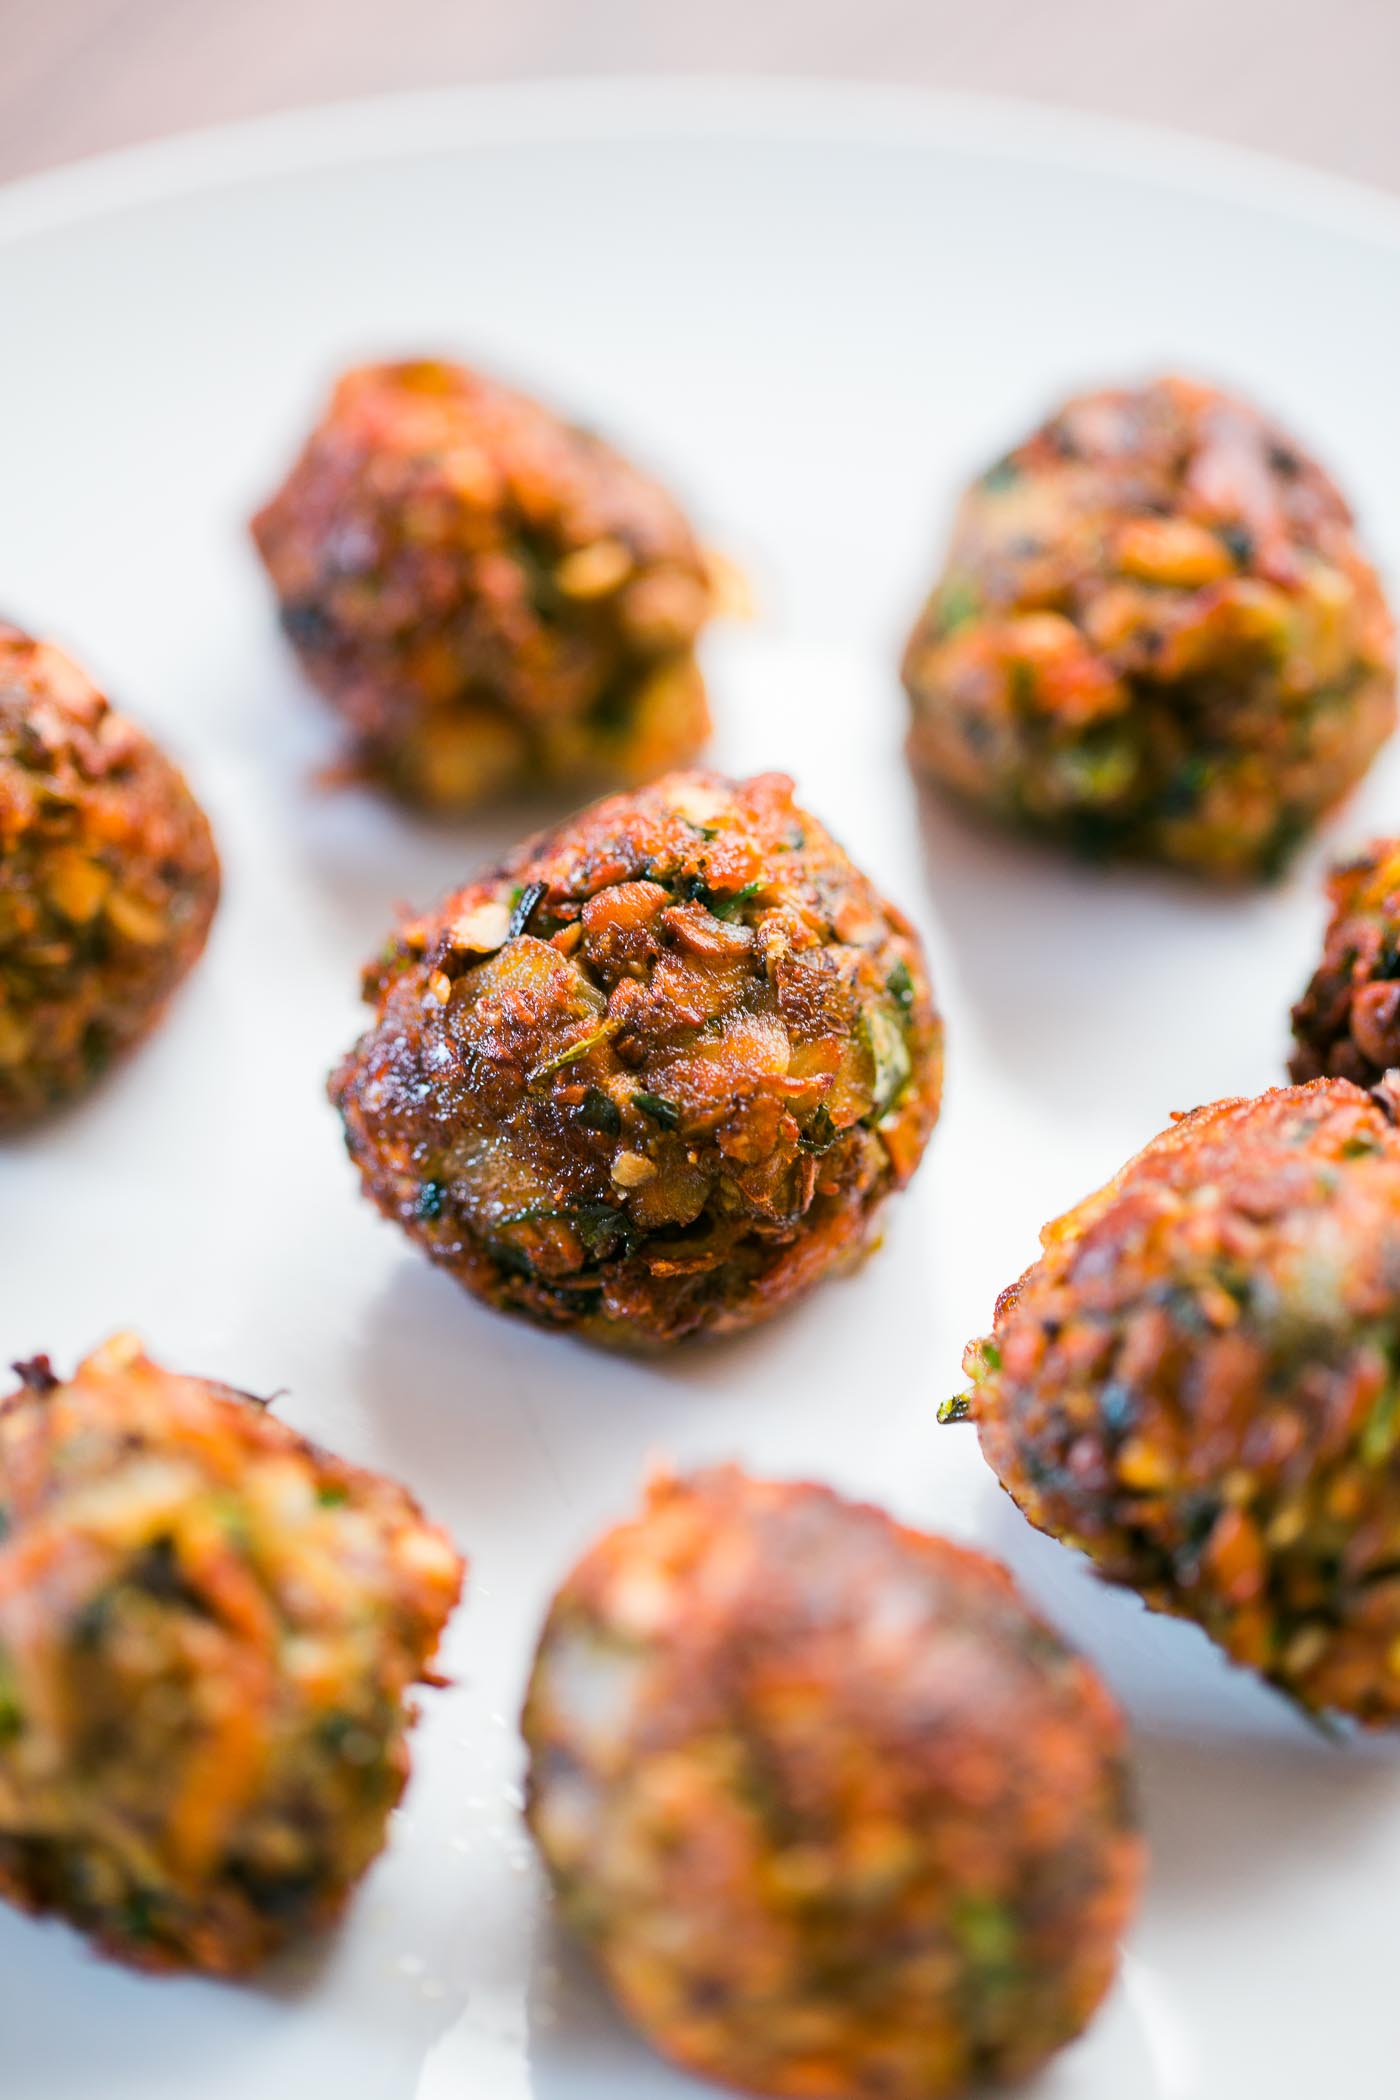 How to make vegan meatballs - delish and meat-free! Click for easy recipe.